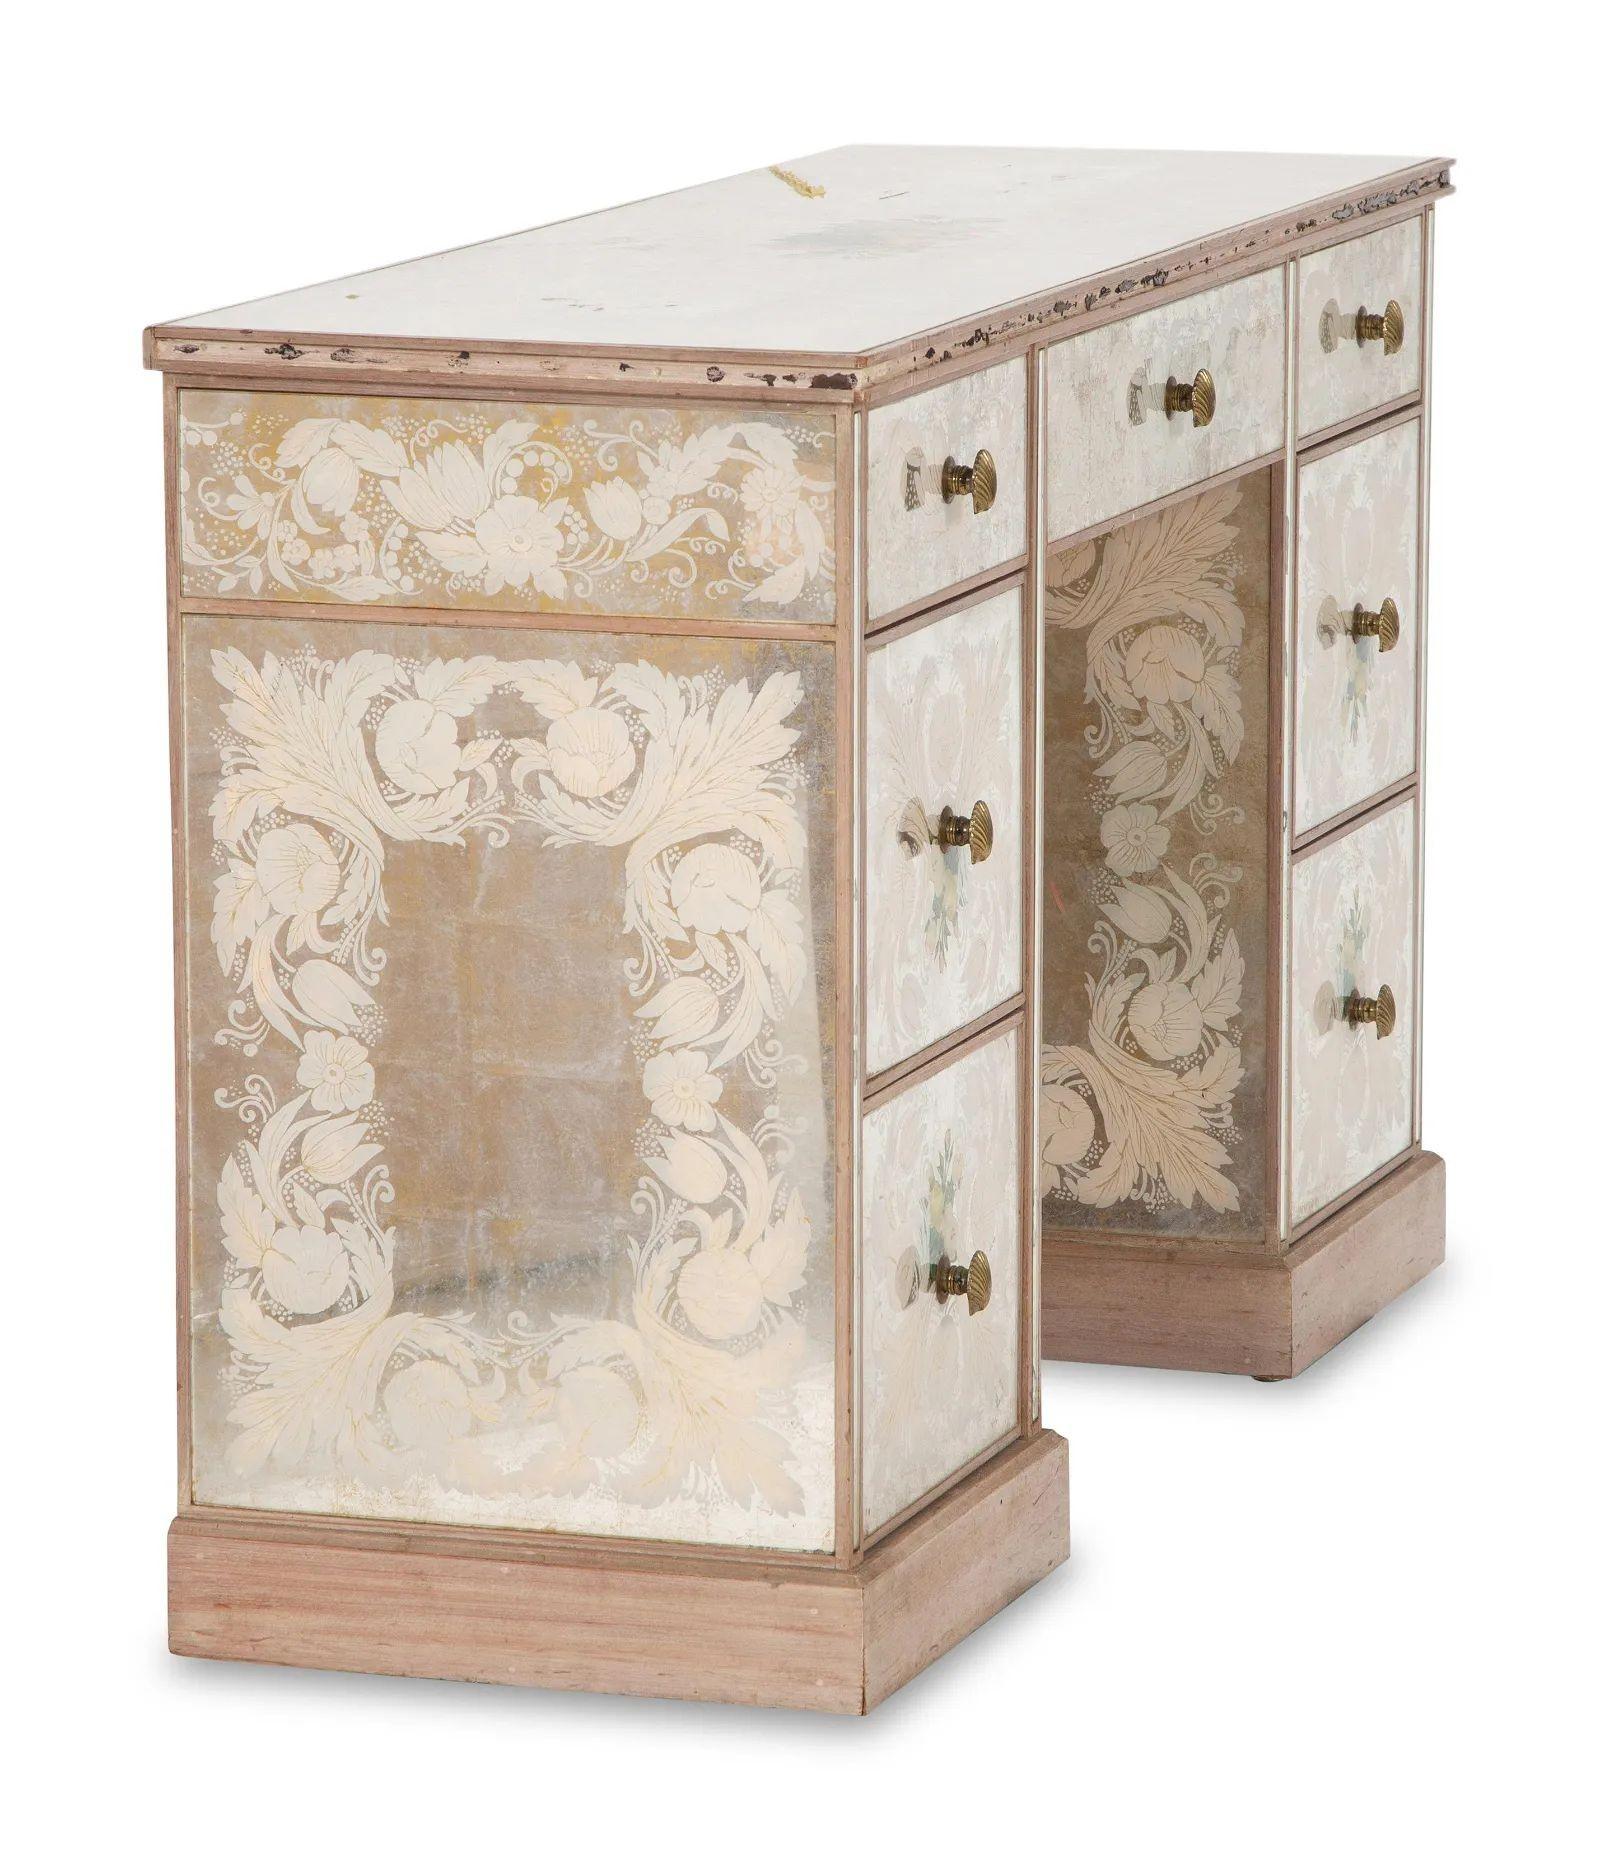 Hollywood Regency French Eglomise mirrored desk, Vanity or writing table.
A stunning Eglomise knee hold desk having all over decorative design on a painted distressed base. 
Height 31 x width 48 x depth 16 1/2 inches.